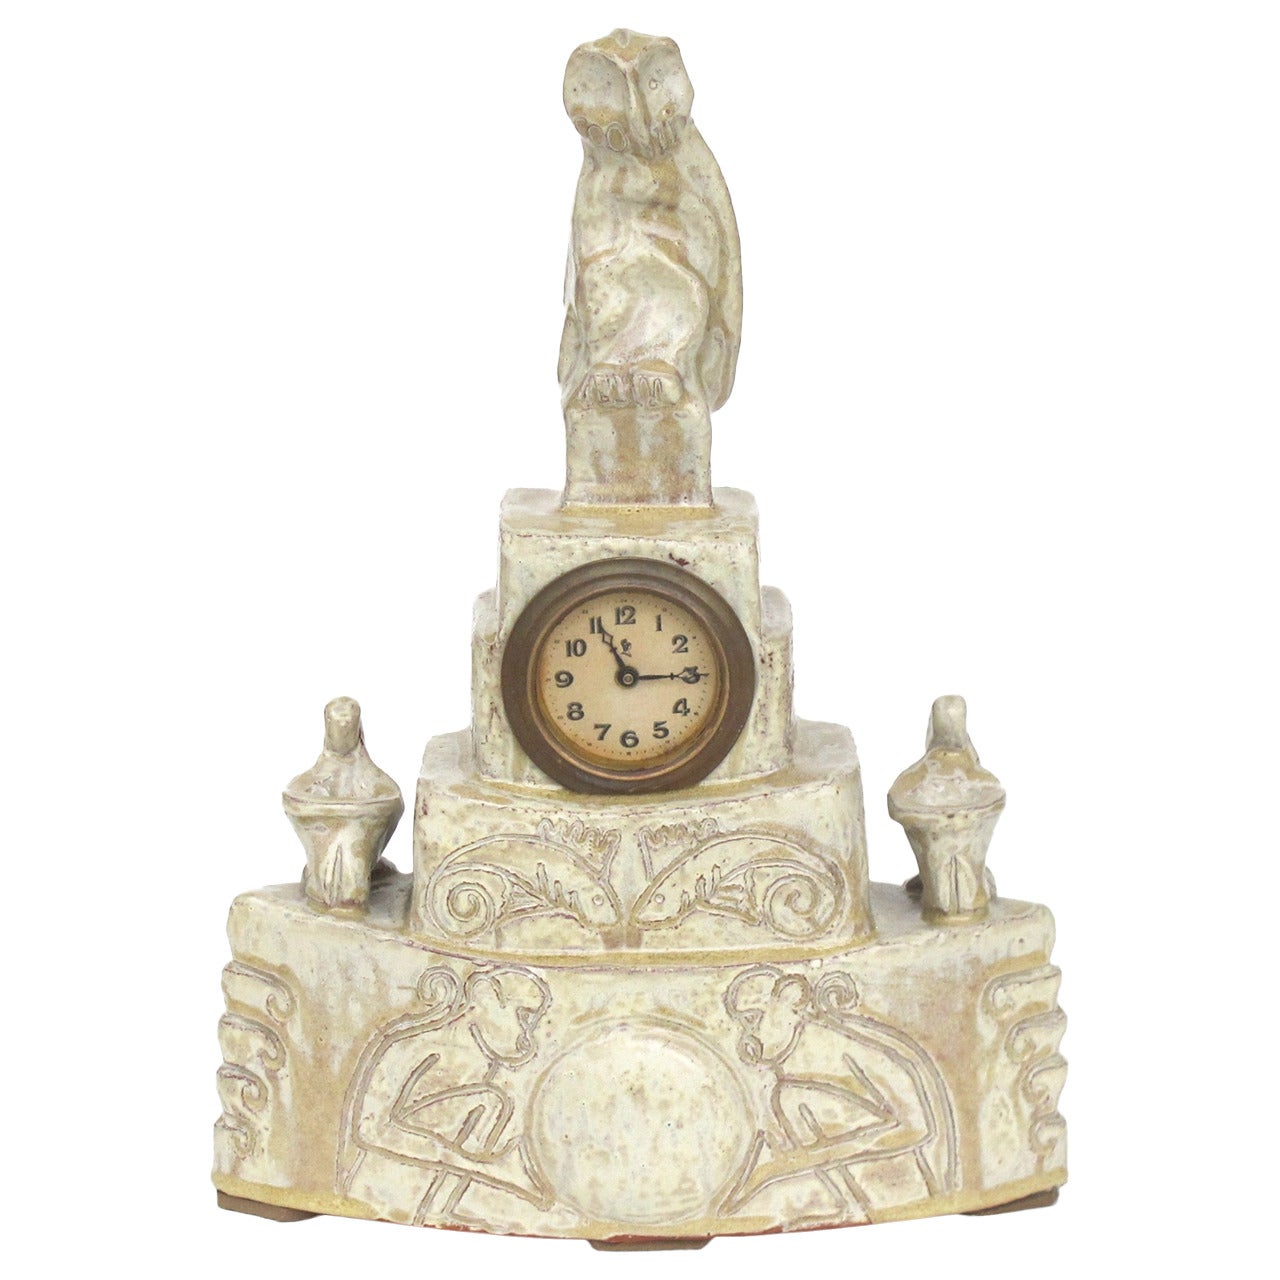 Intriguing Ceramic Mantle Clock with Owl, Apes and Fish by Cris Agterberg For Sale